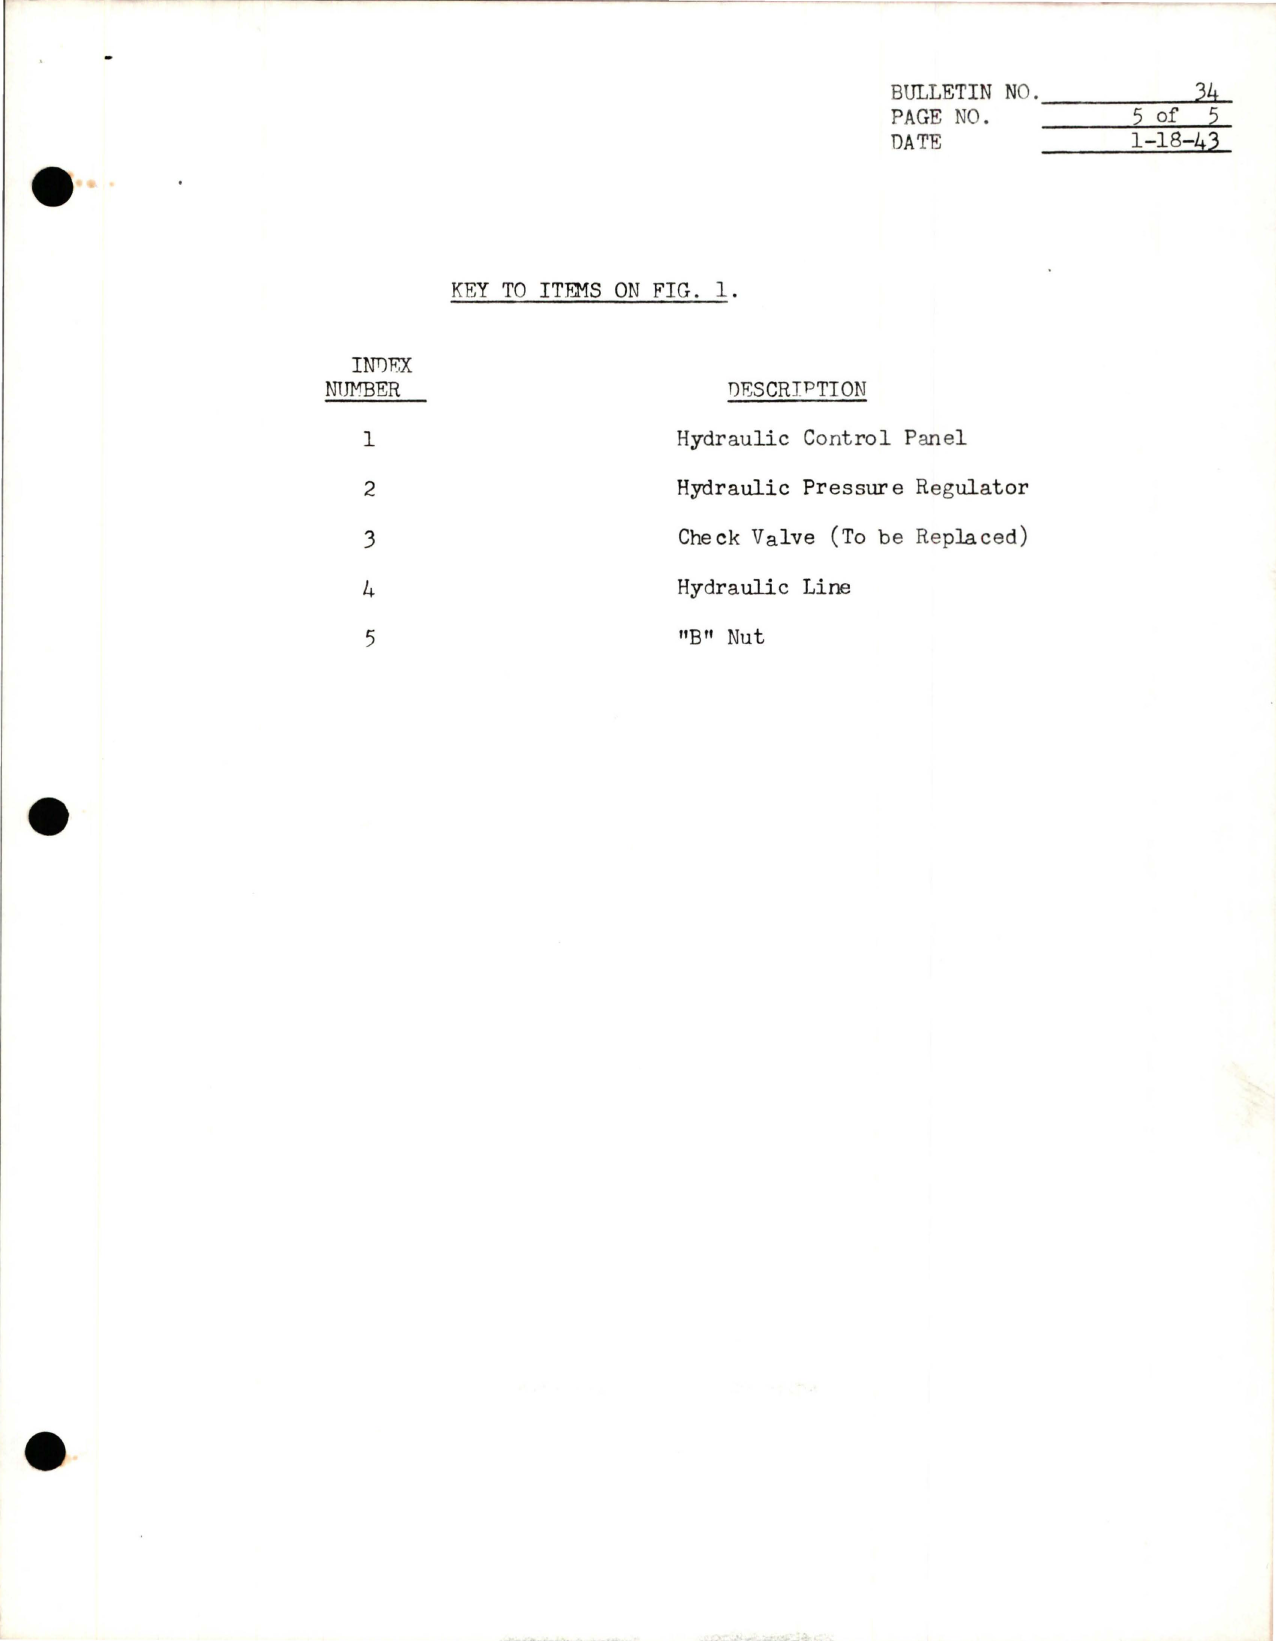 Sample page 5 from AirCorps Library document: Replacement of the Hydraulic Check Valve at the Hydraulic Pressure Regulator